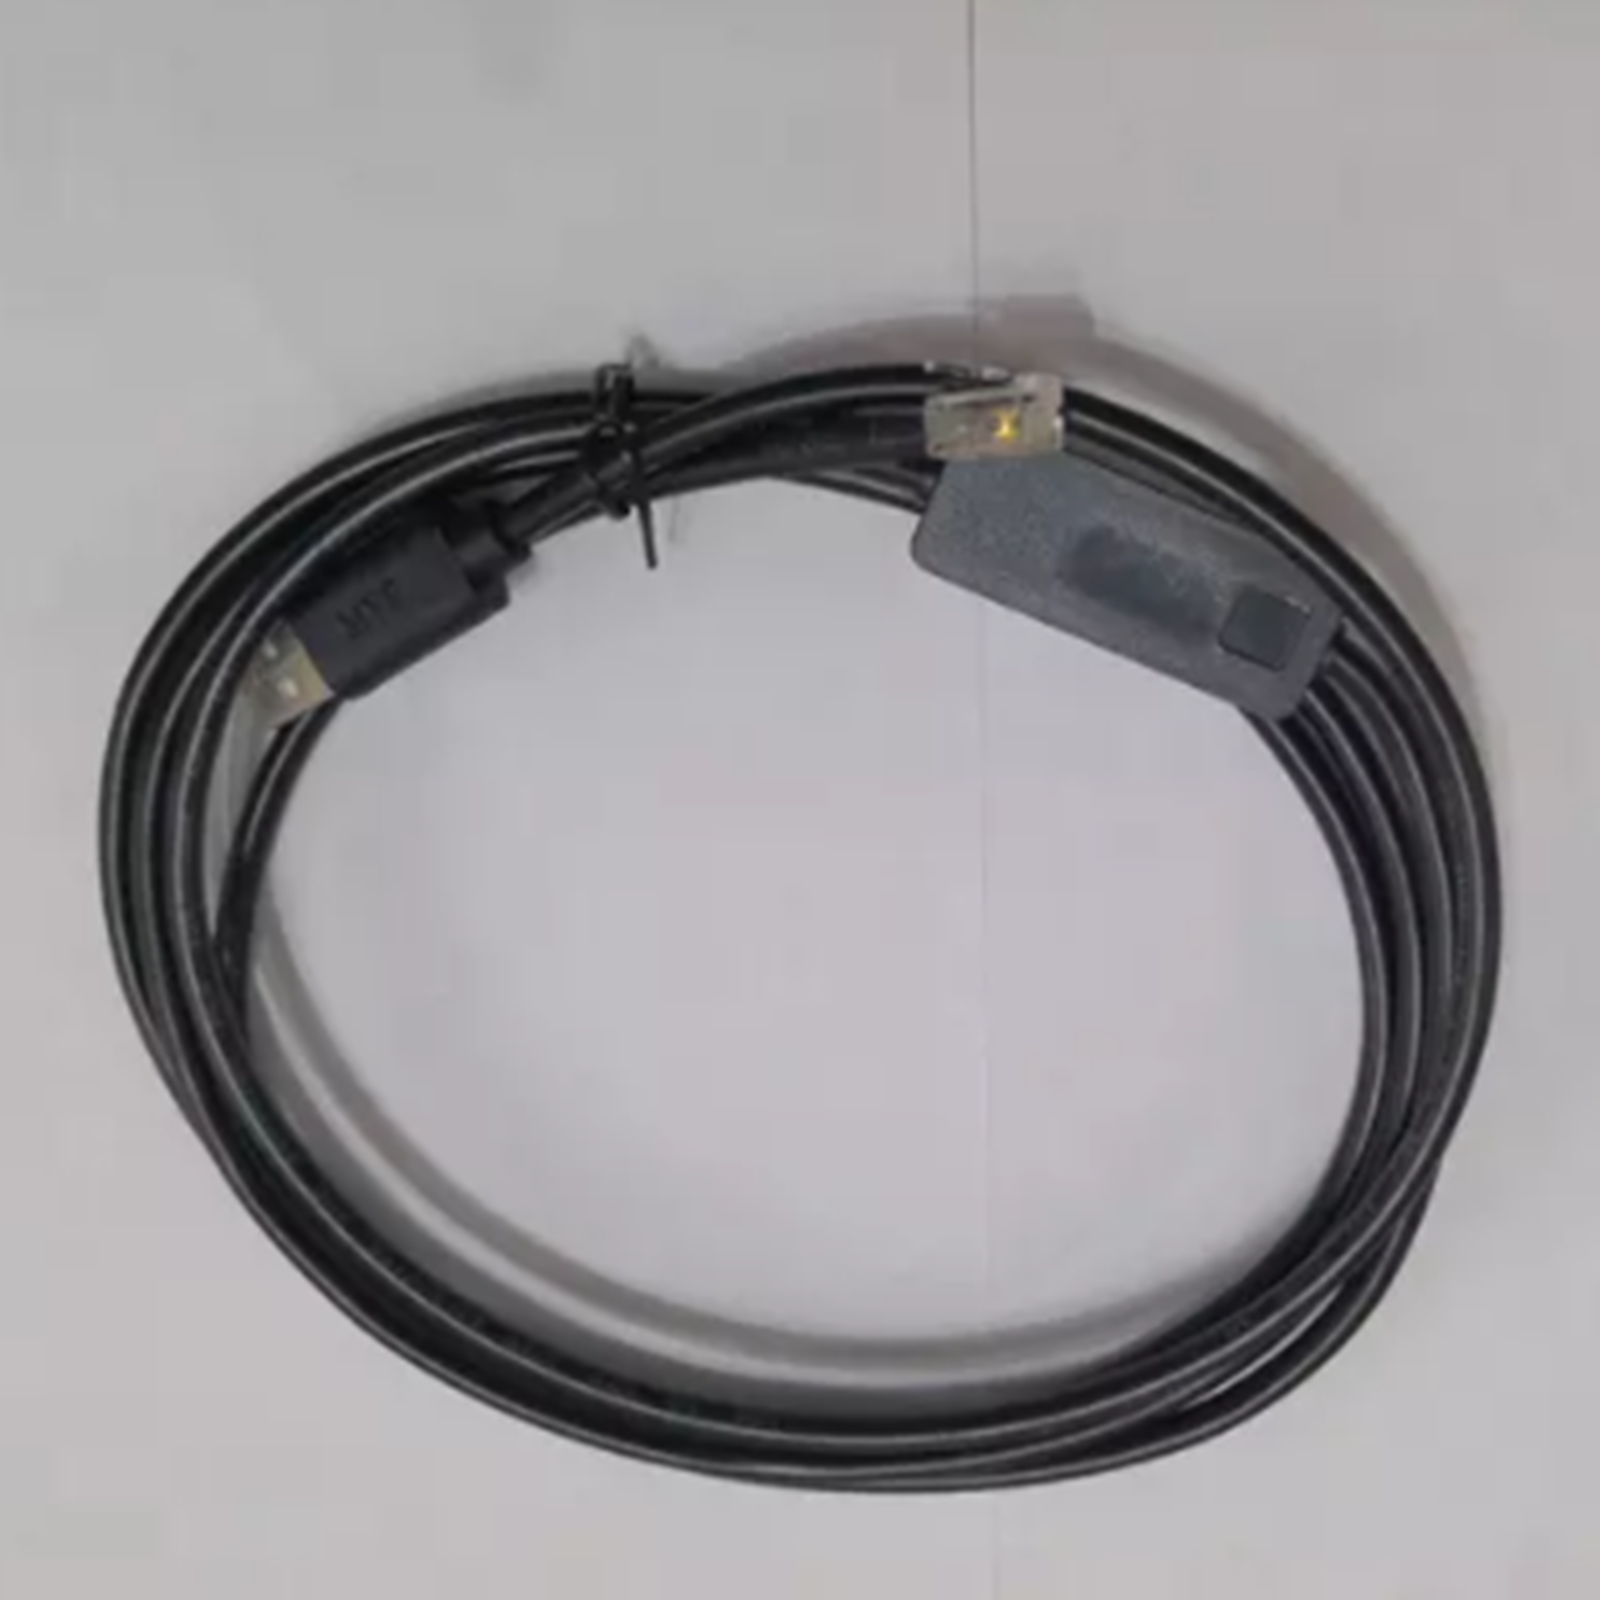 USB-NPCU-01 Debugging Cable USB Download Cable For ABB